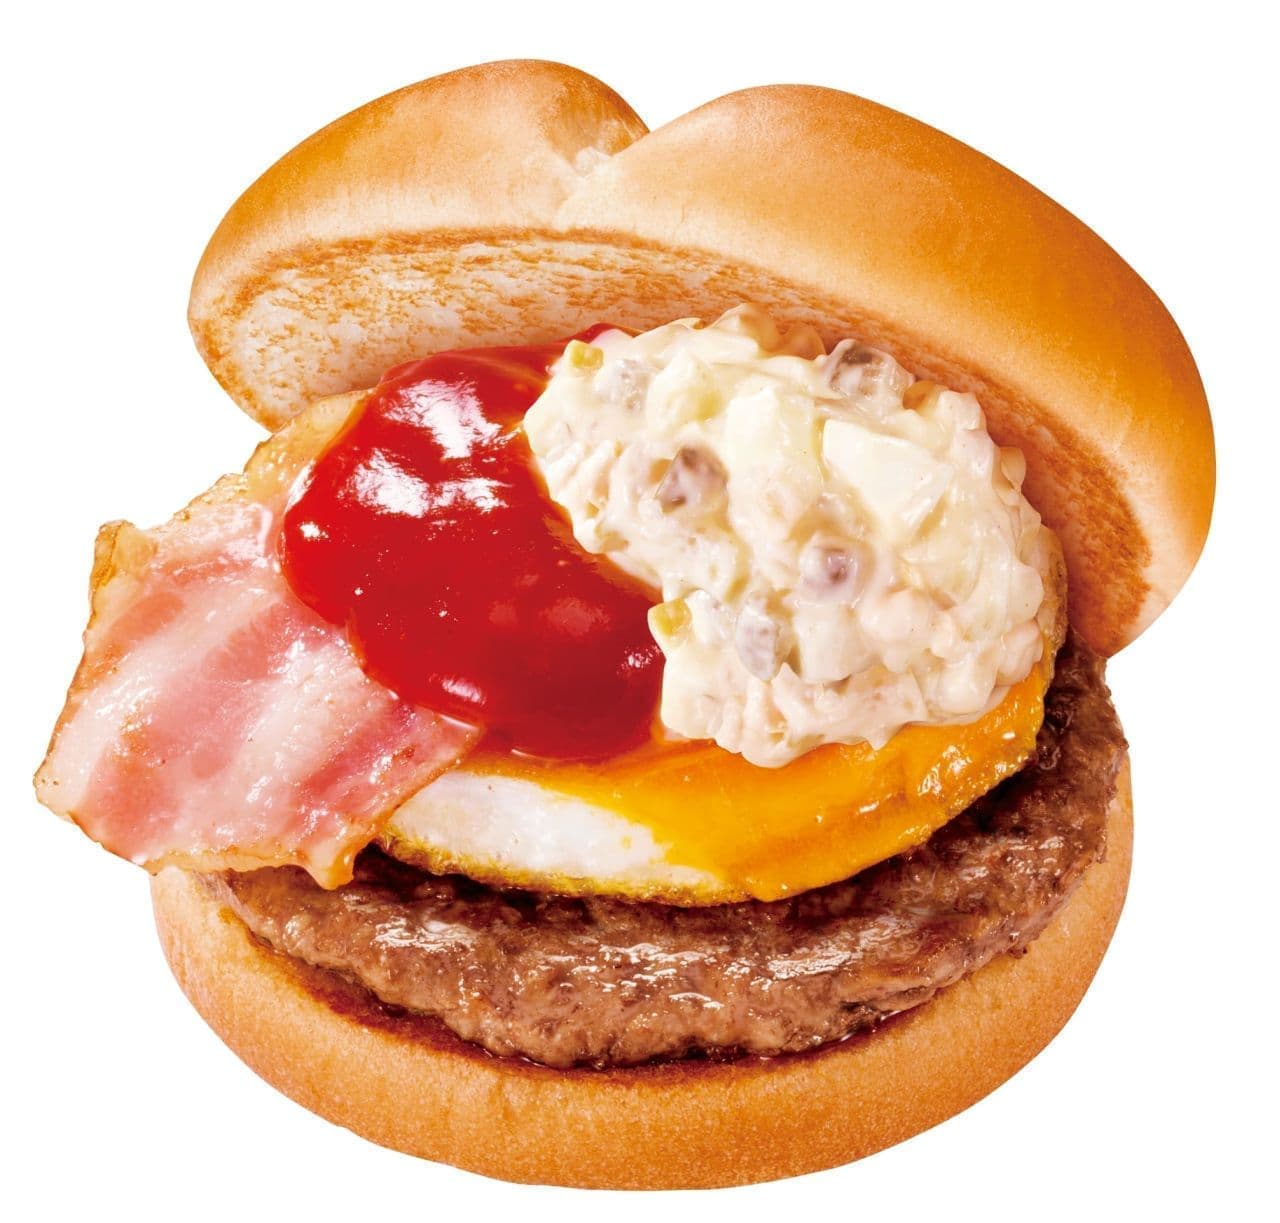 Fast Kitchen "Bacon and Egg Burger